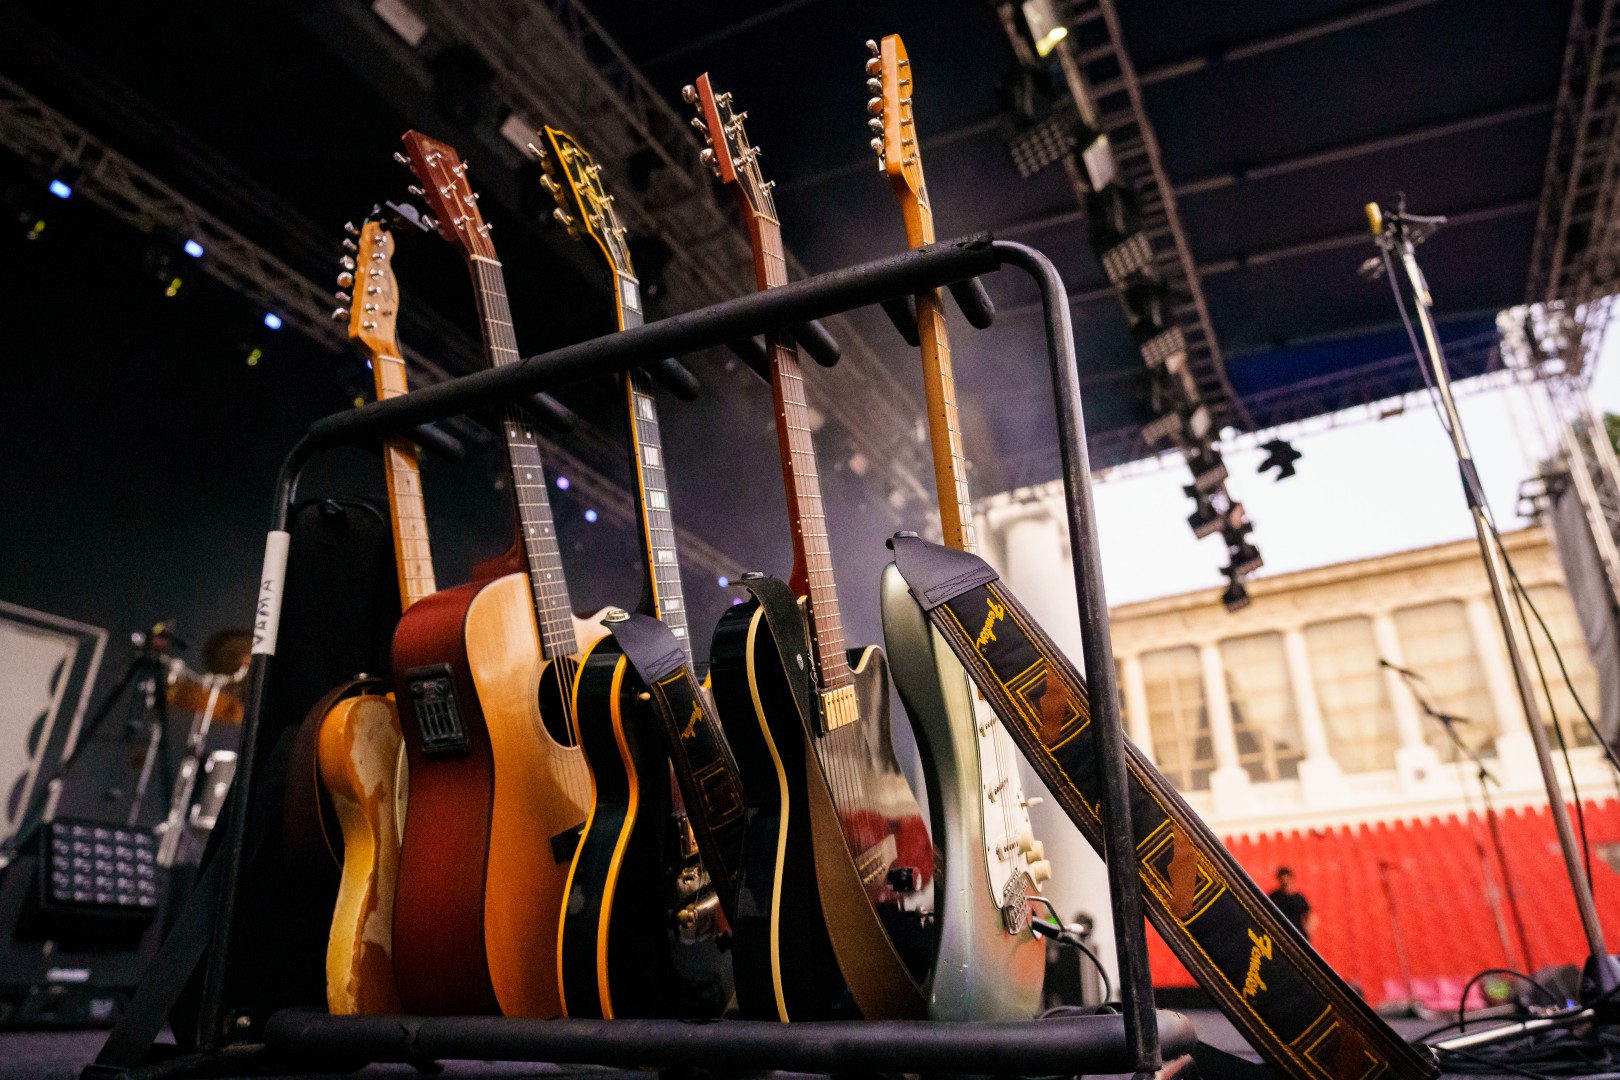 Guitars at Arenele Romane in Bucharest on July 29, 2021 (689bdea59a)